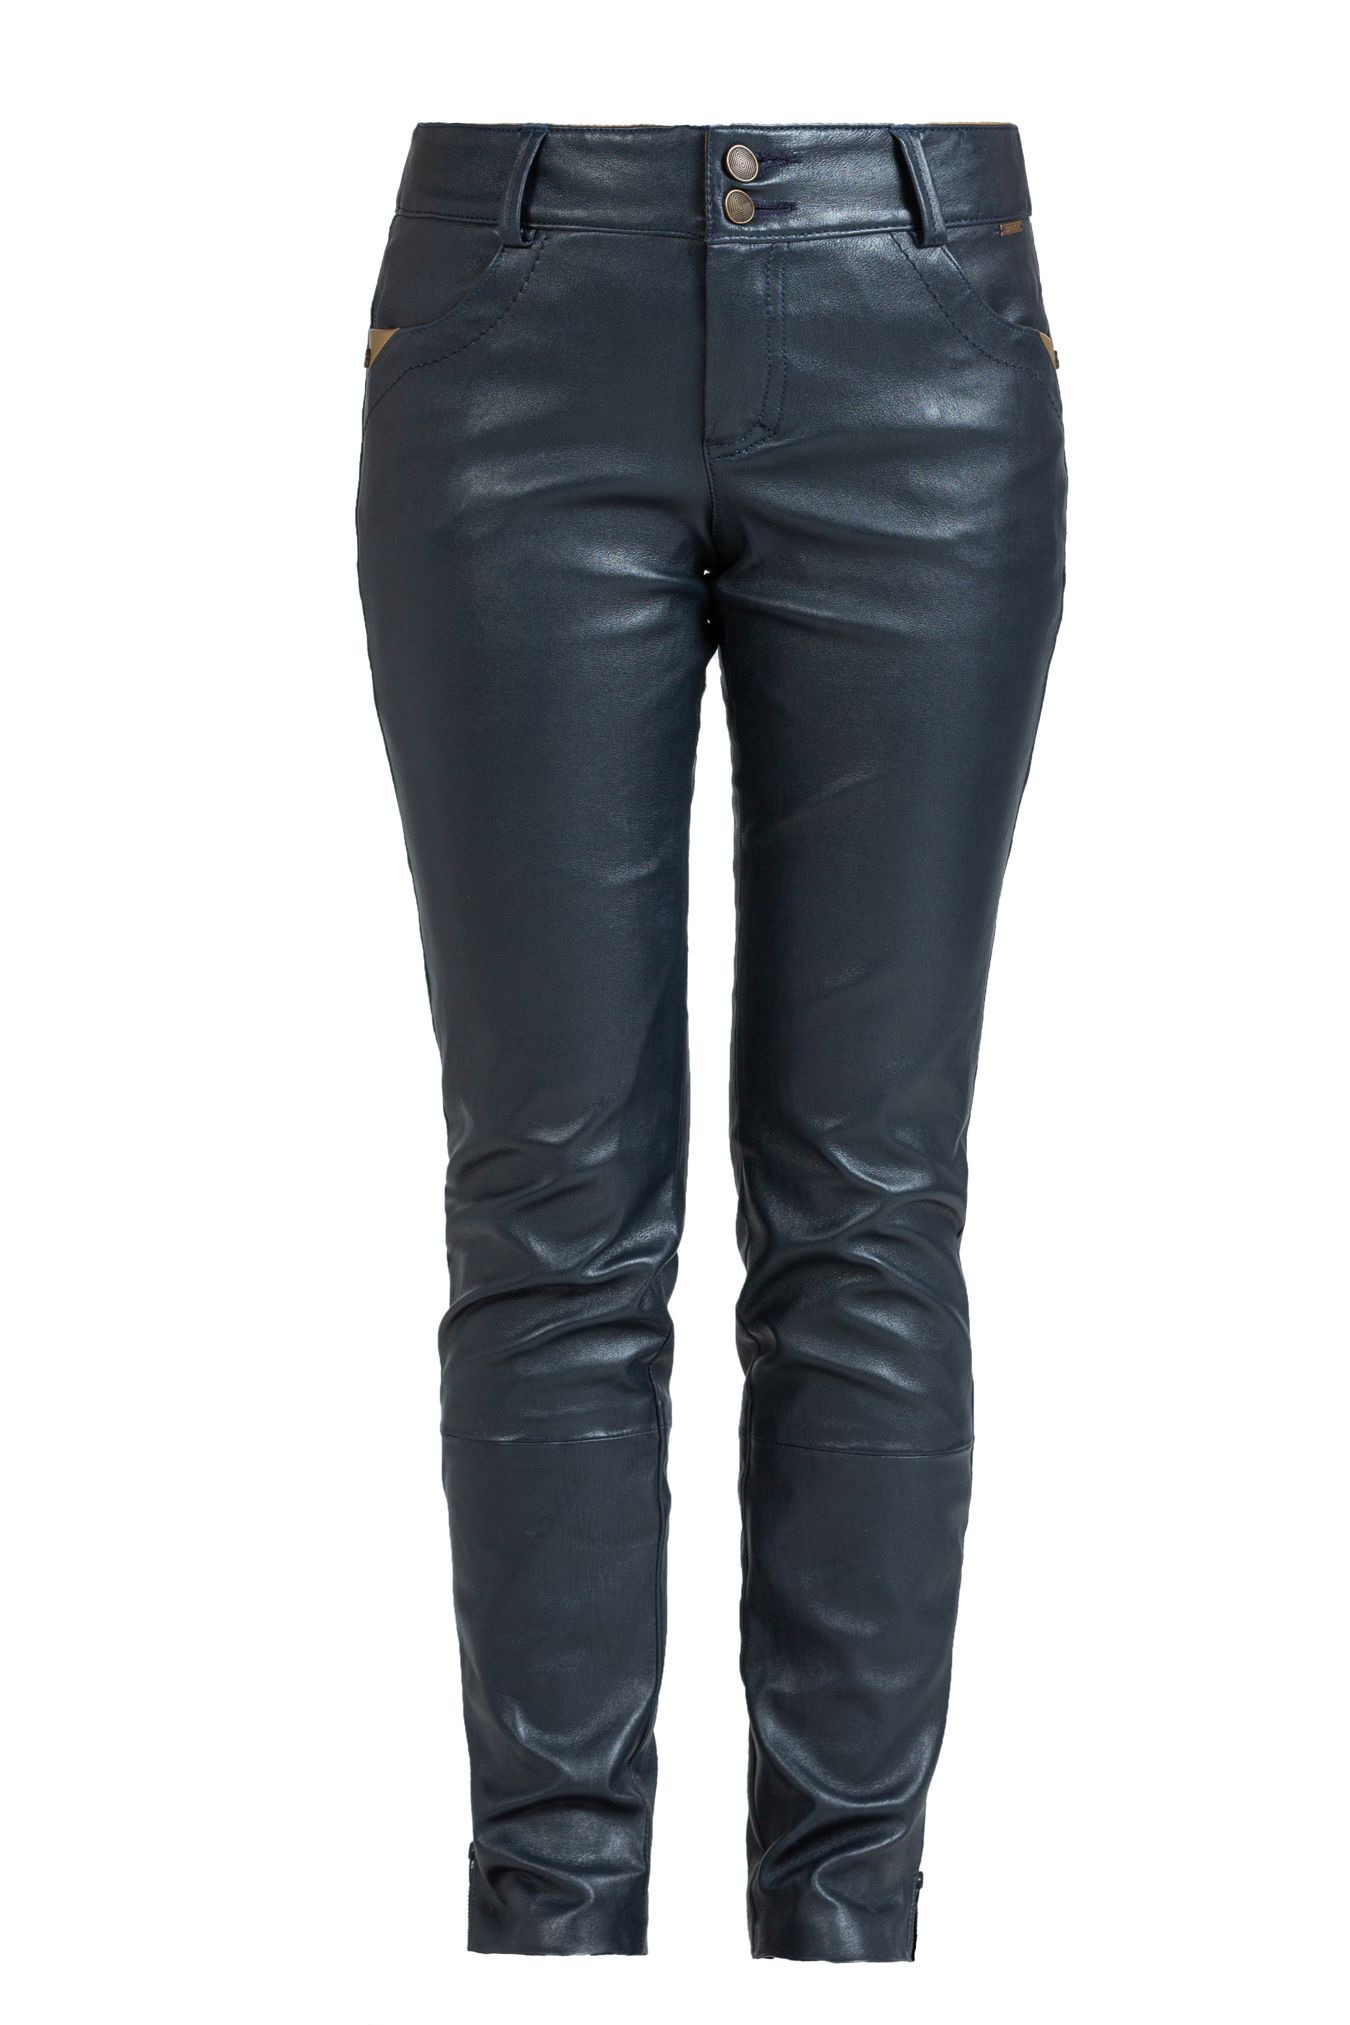 120008 LEATHER PANTS NAVY BLUE - By Rieske image 3